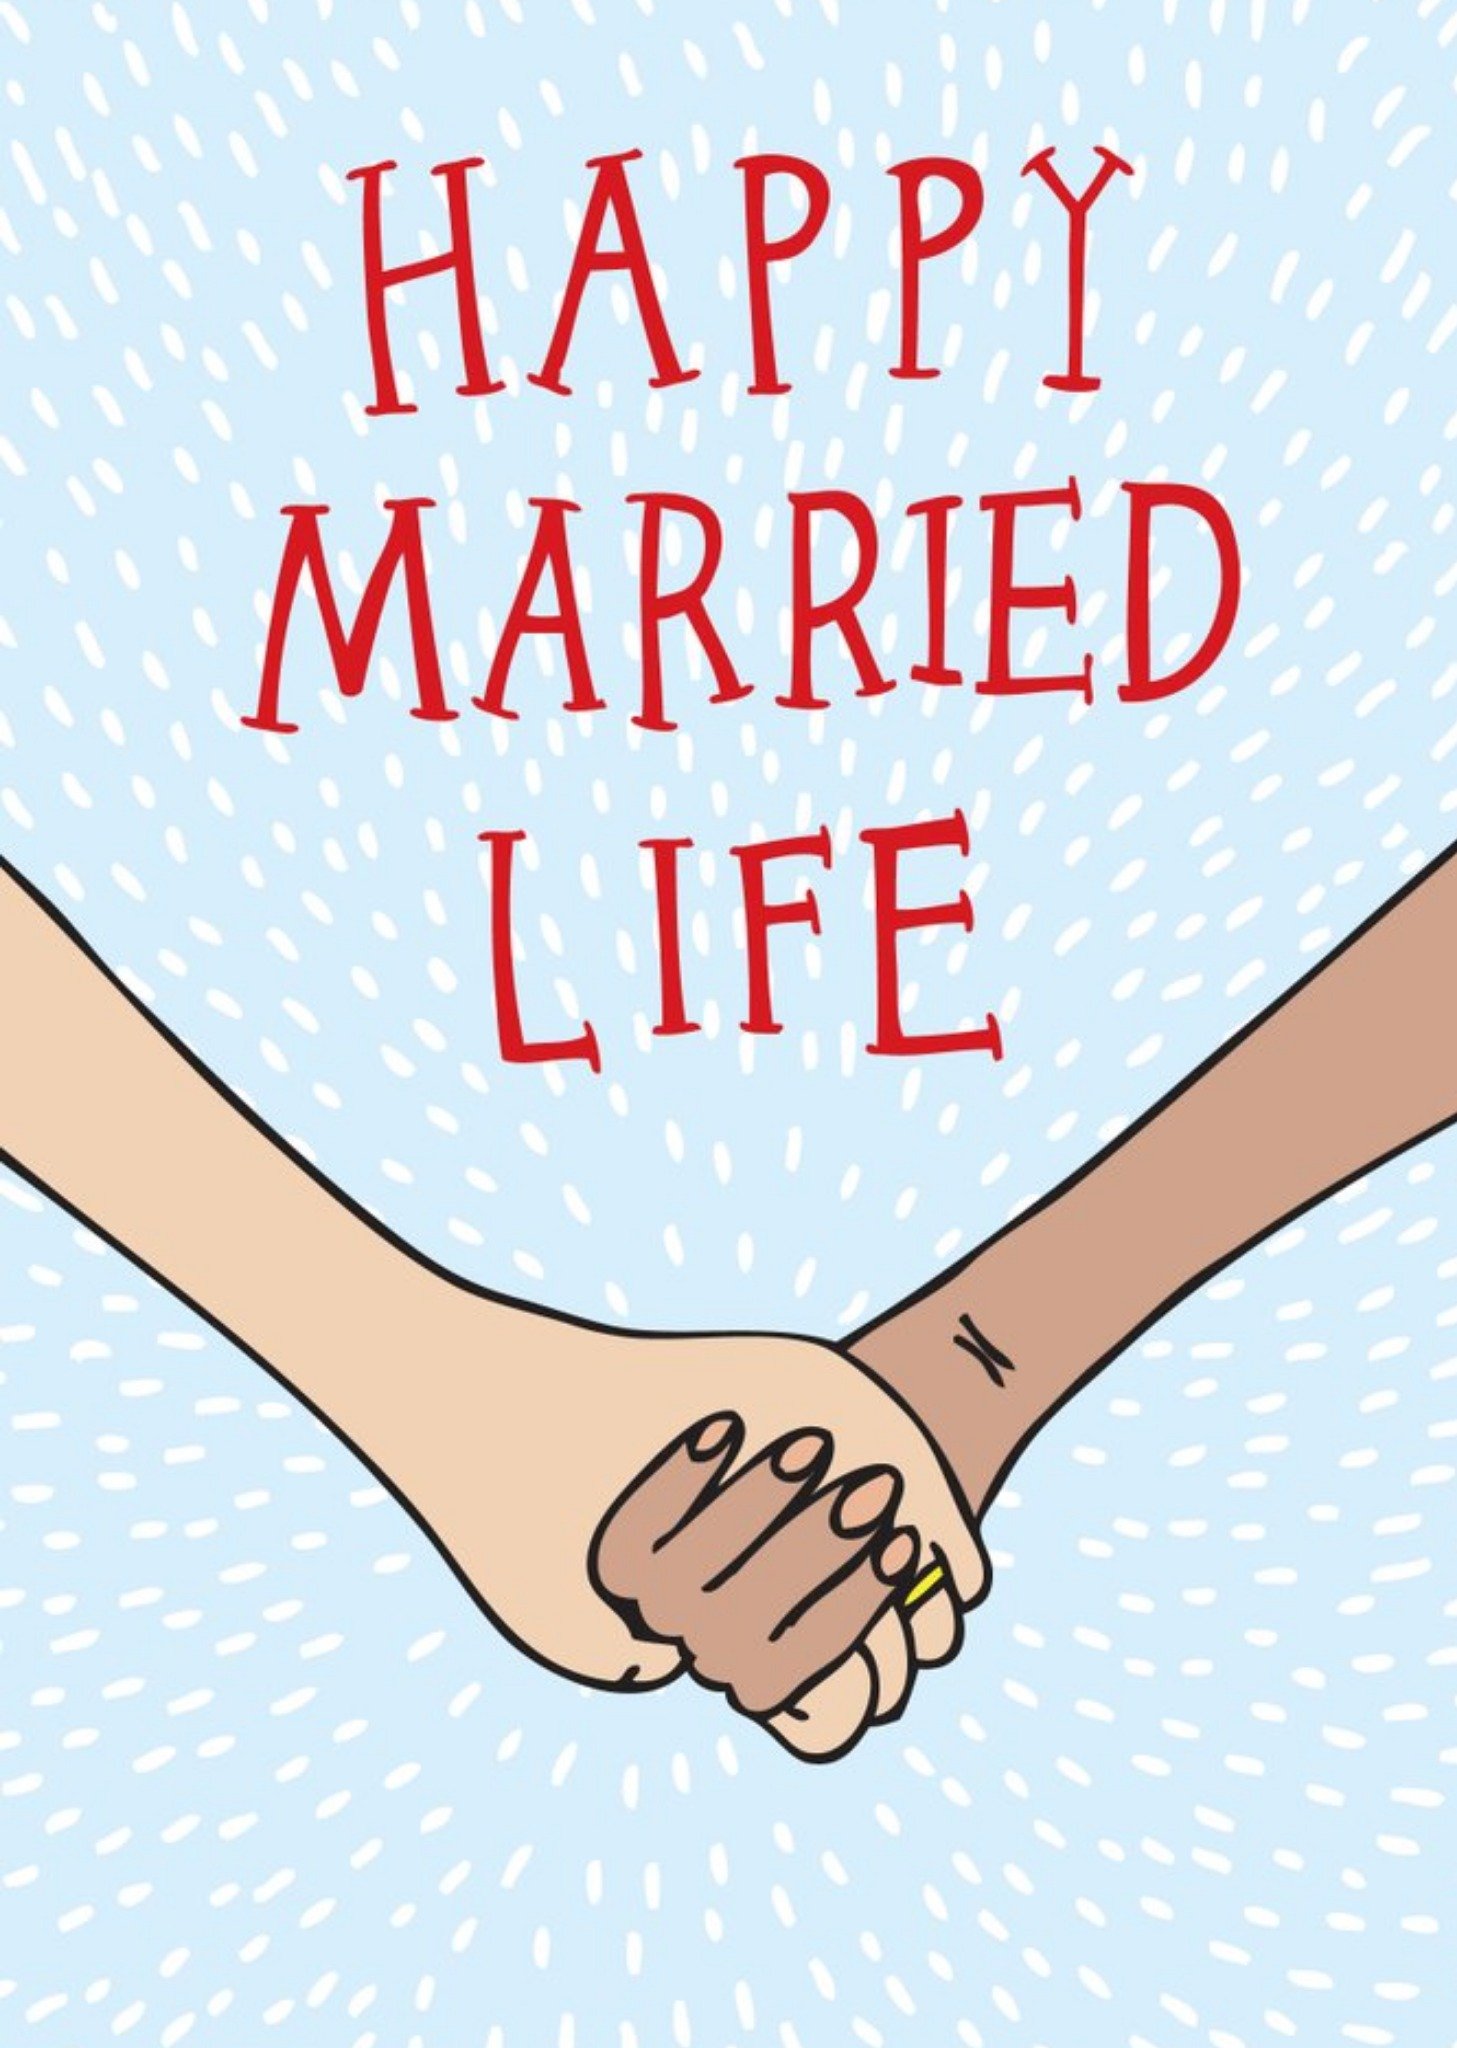 Moonpig Illustration Of A Couple Holding Hands Happy Married Life Wedding Card, Large